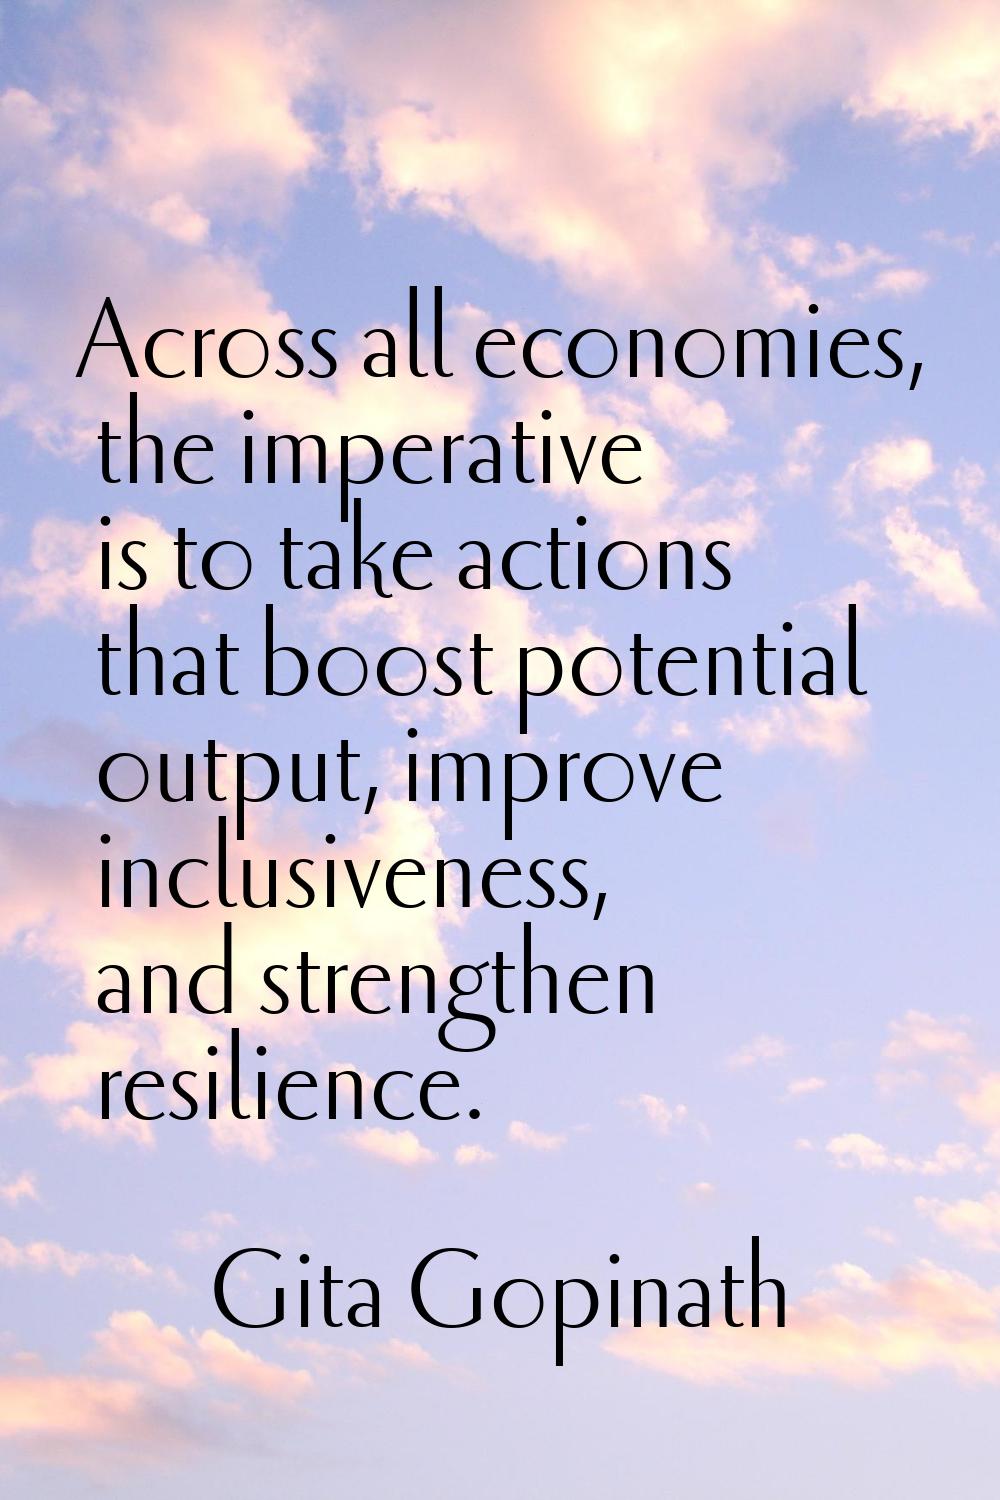 Across all economies, the imperative is to take actions that boost potential output, improve inclus